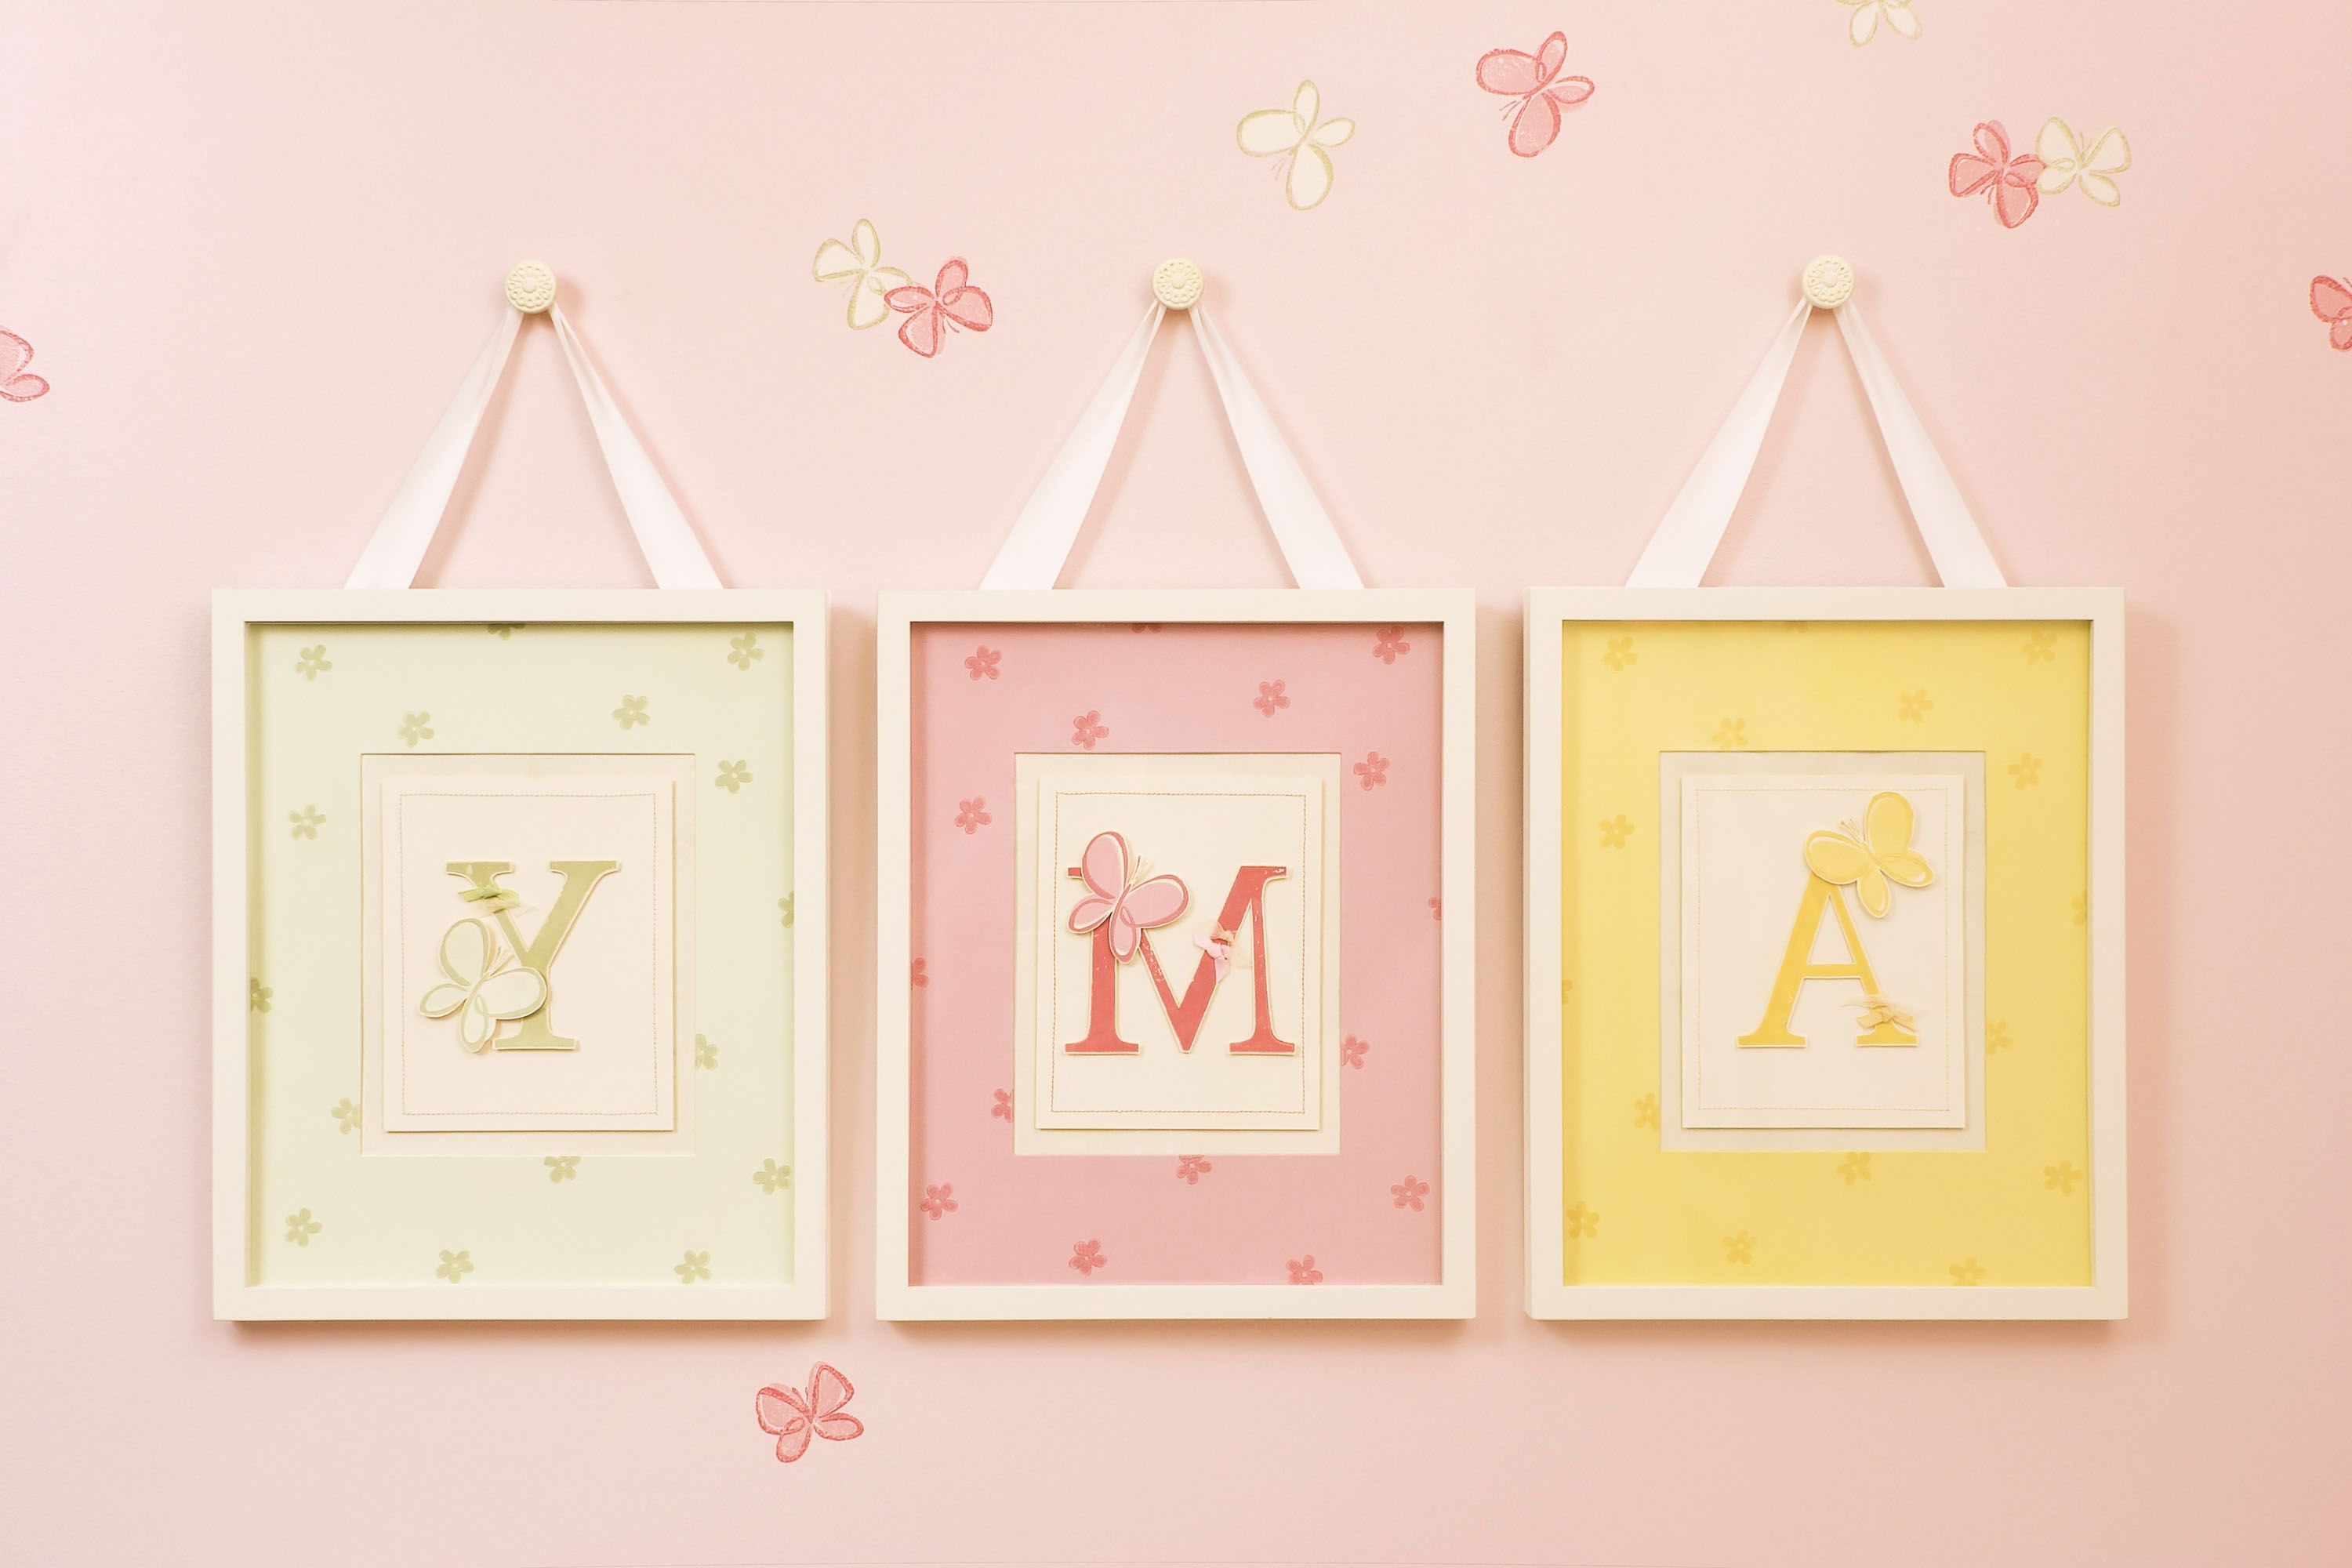 Stampin' Up! Wall Art Pertaining To Trendy Nursery Wall Accents (View 5 of 15)